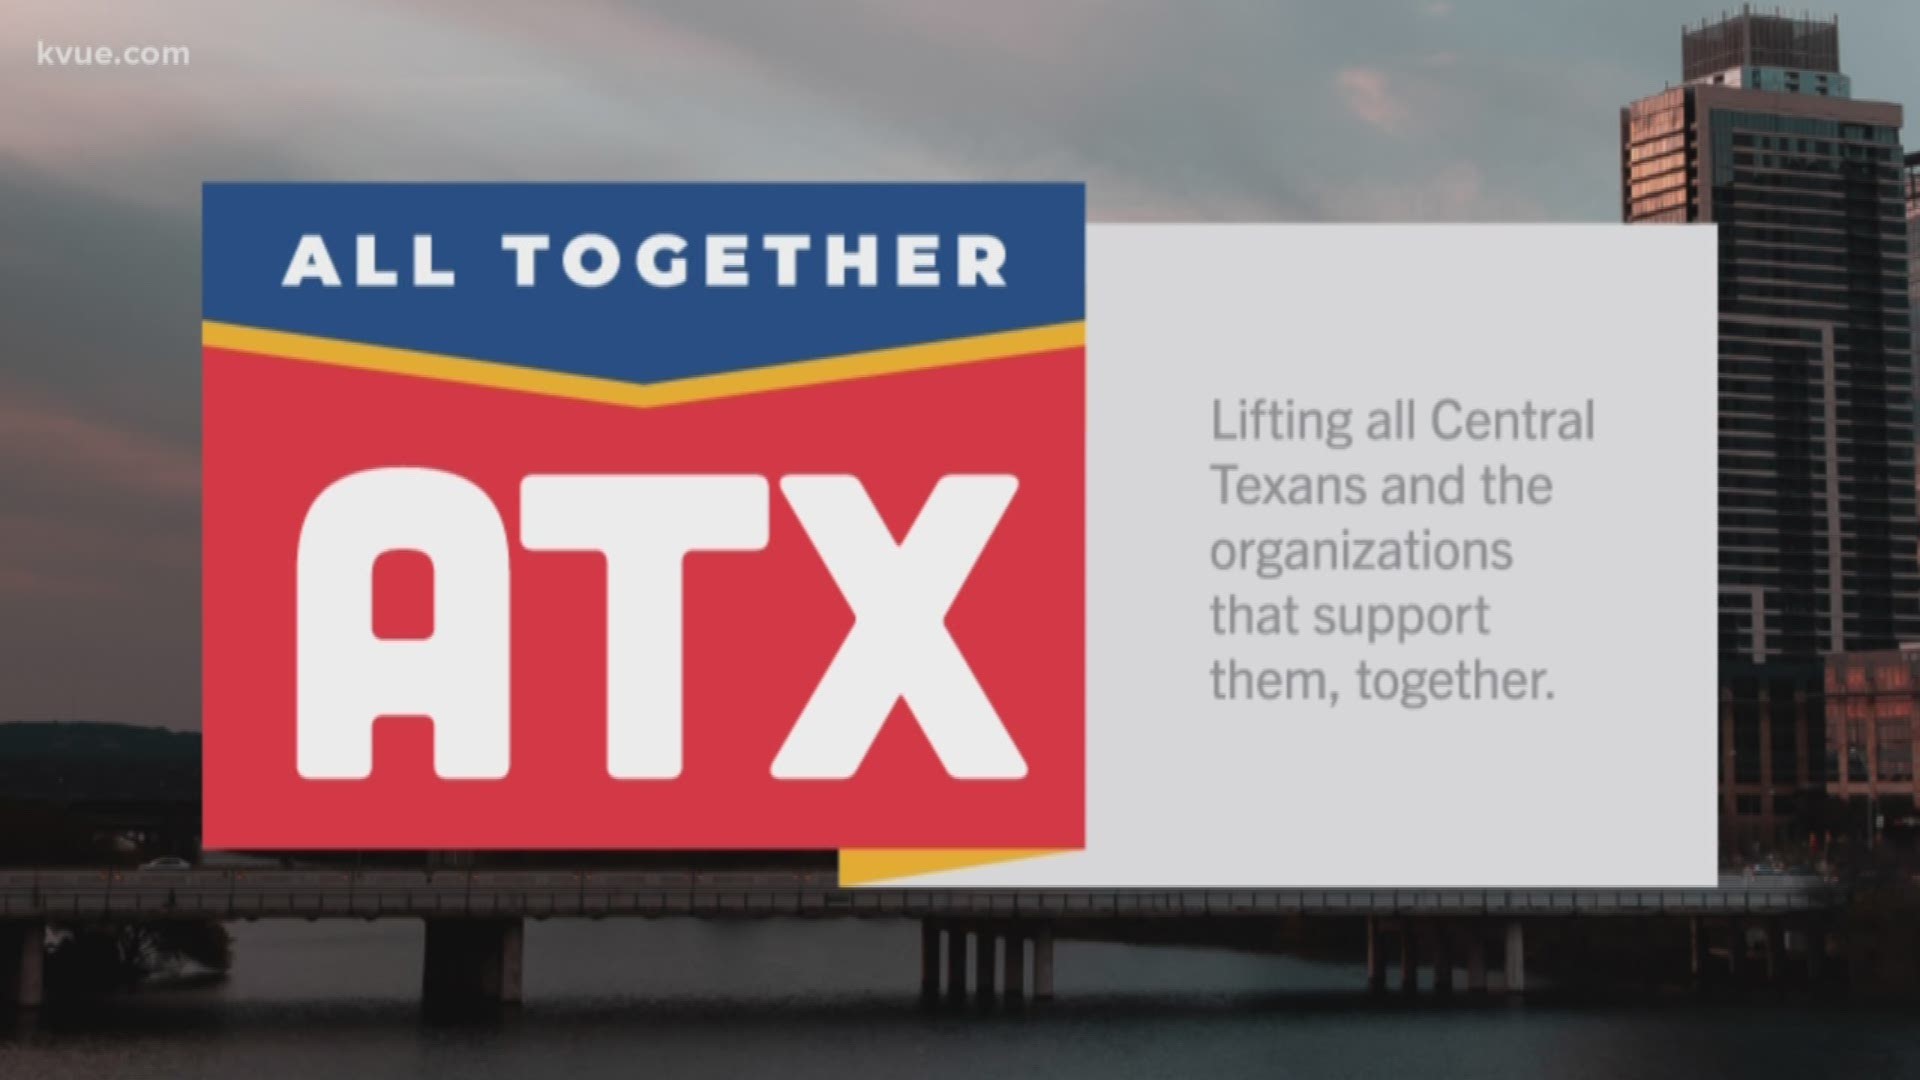 KVUE and news outlets across Austin are coming together for a digital fundraiser on April 3.